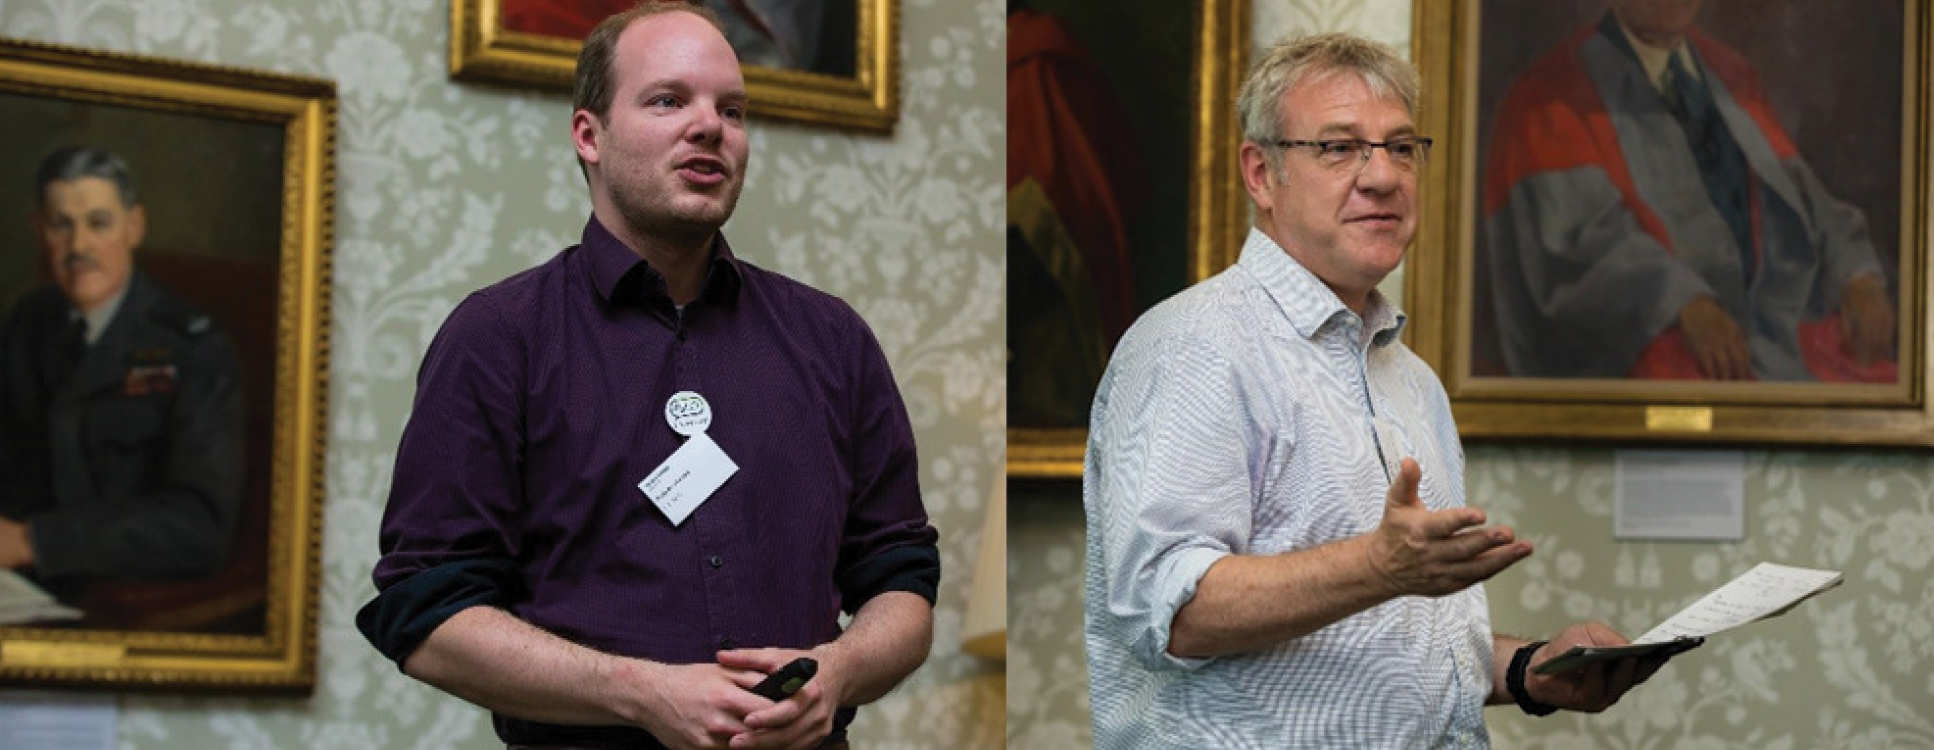 (Left to right): The keynote talk was provided by Philip Strothmann of FSLCI; The Network’s host department’s Deputy Head of Department, Dr Jeremy Woods (Centre for Environmental Policy), closed the event, highlighting that the reach of the Network extends outside of Imperial College London to the wider UK and beyond.